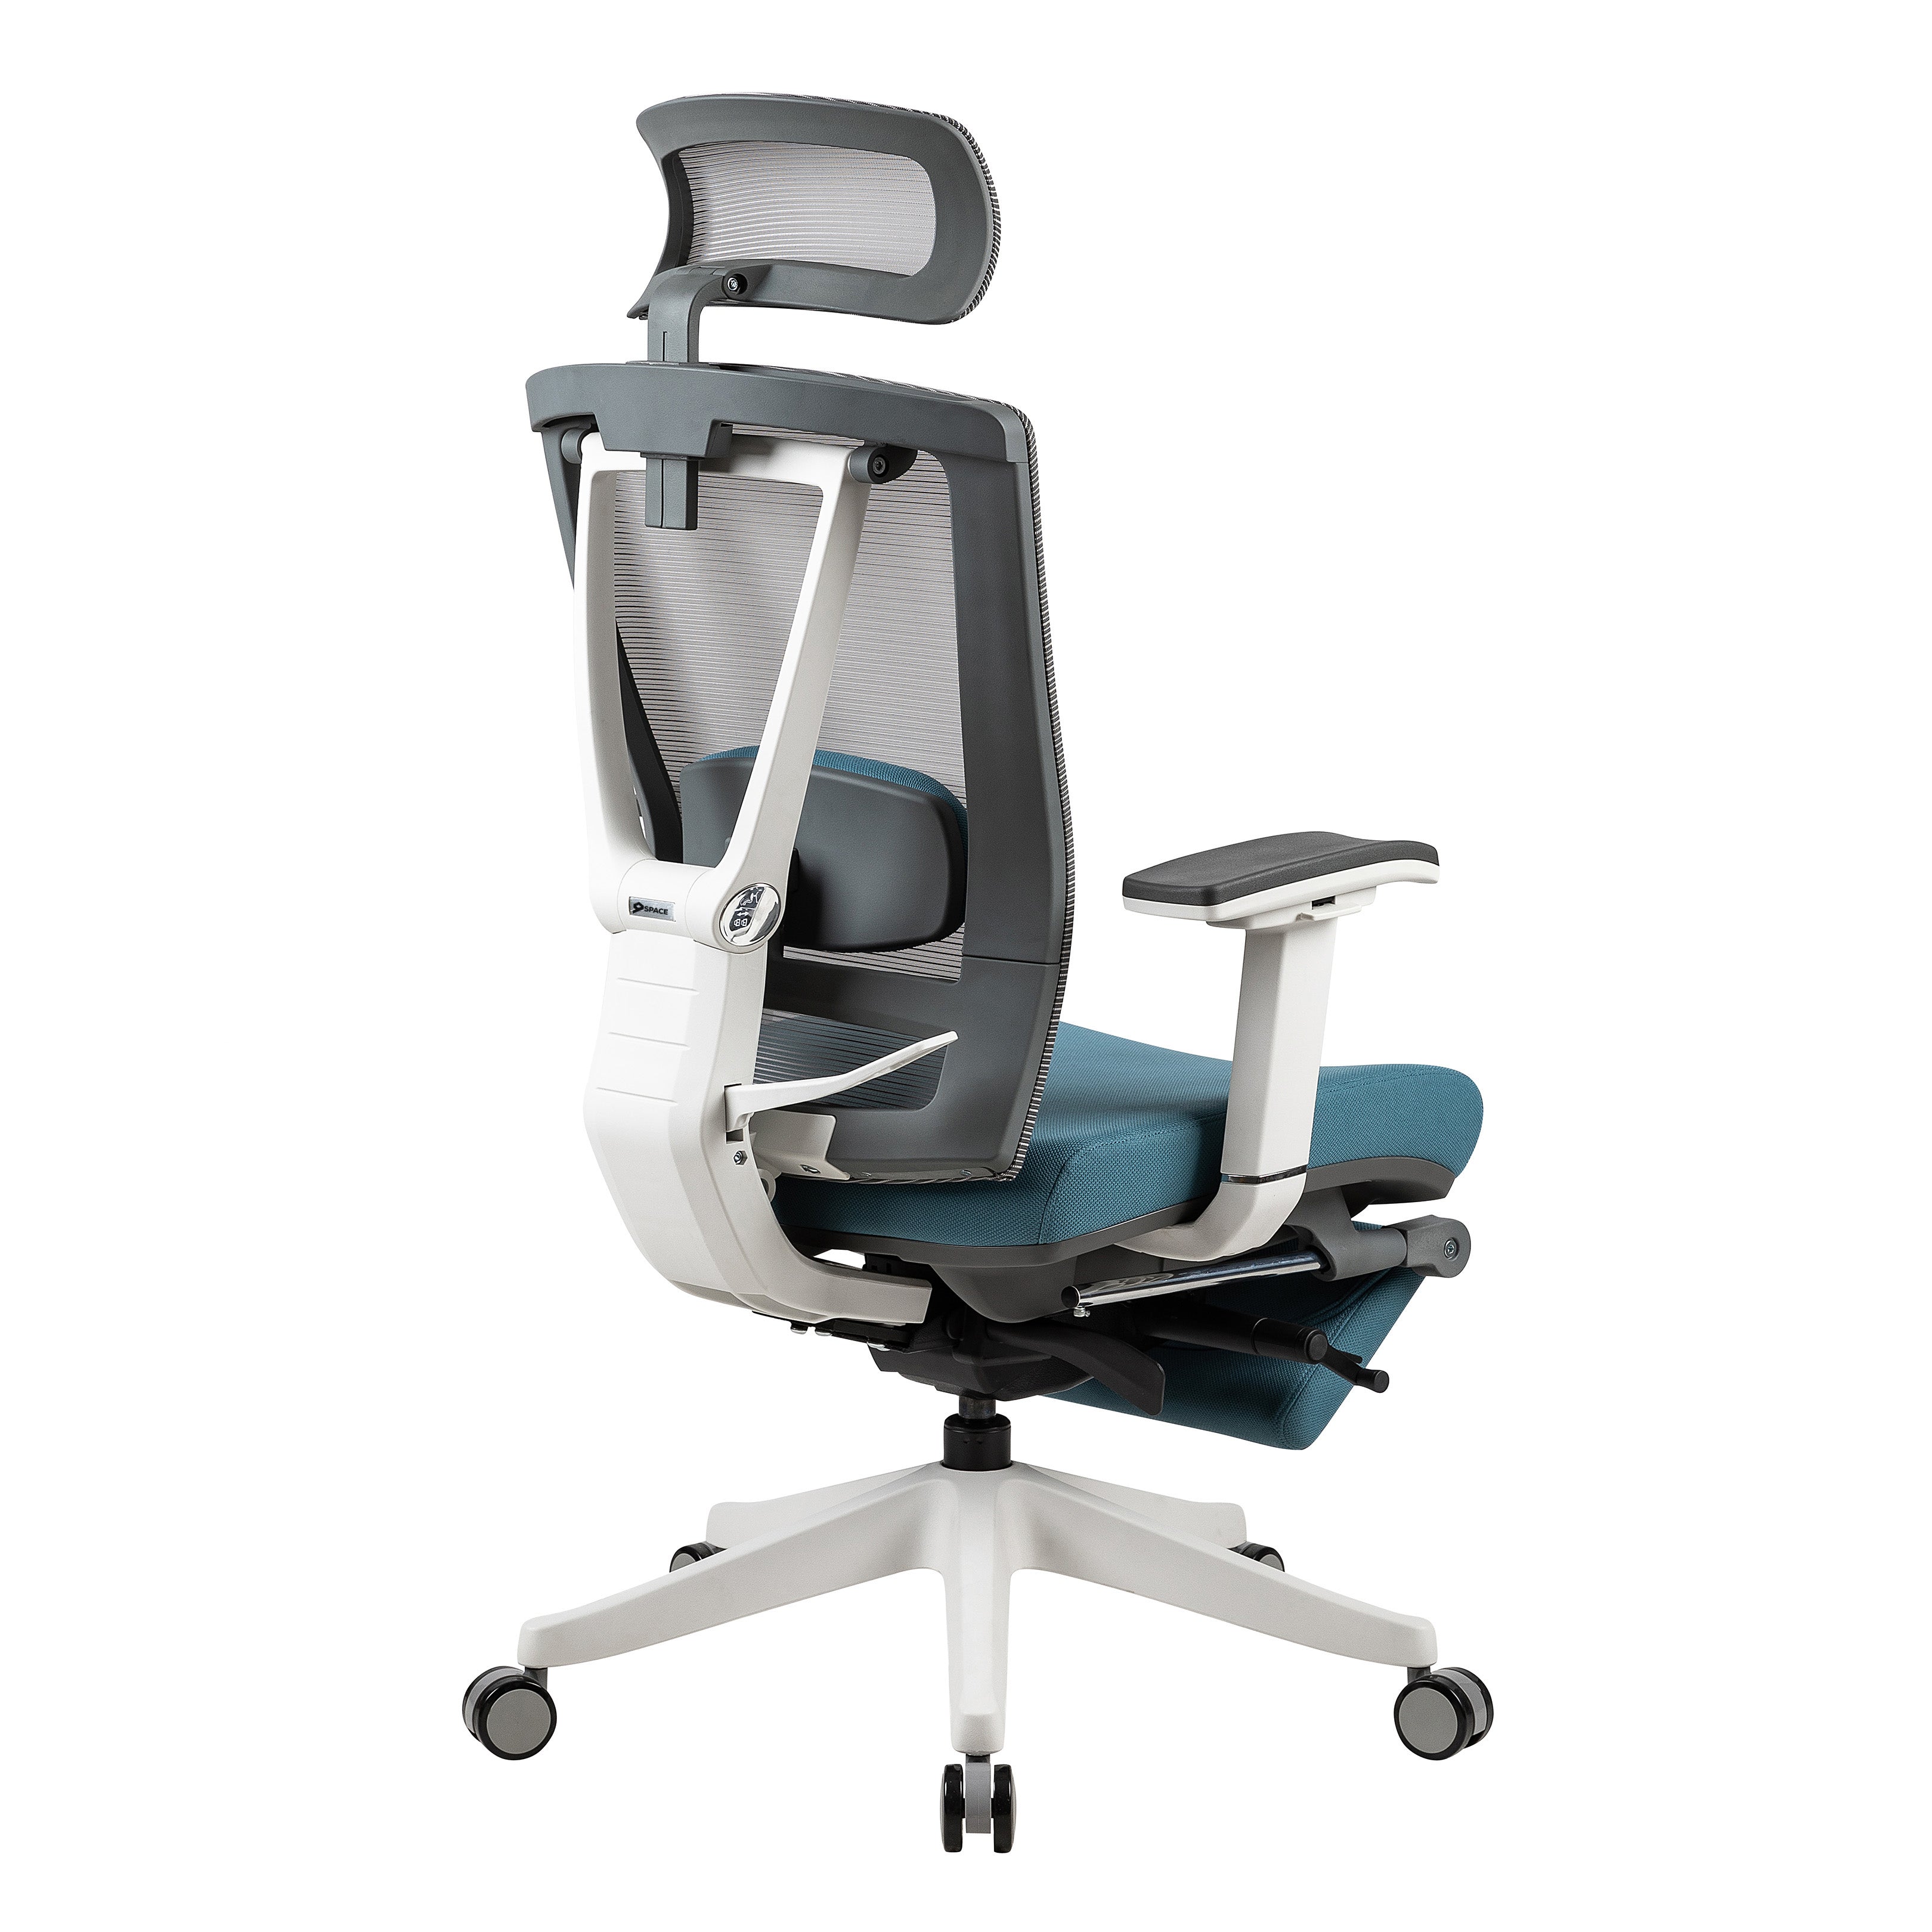 9Space Ergonomic Office Chair Pro - Improve Your Works